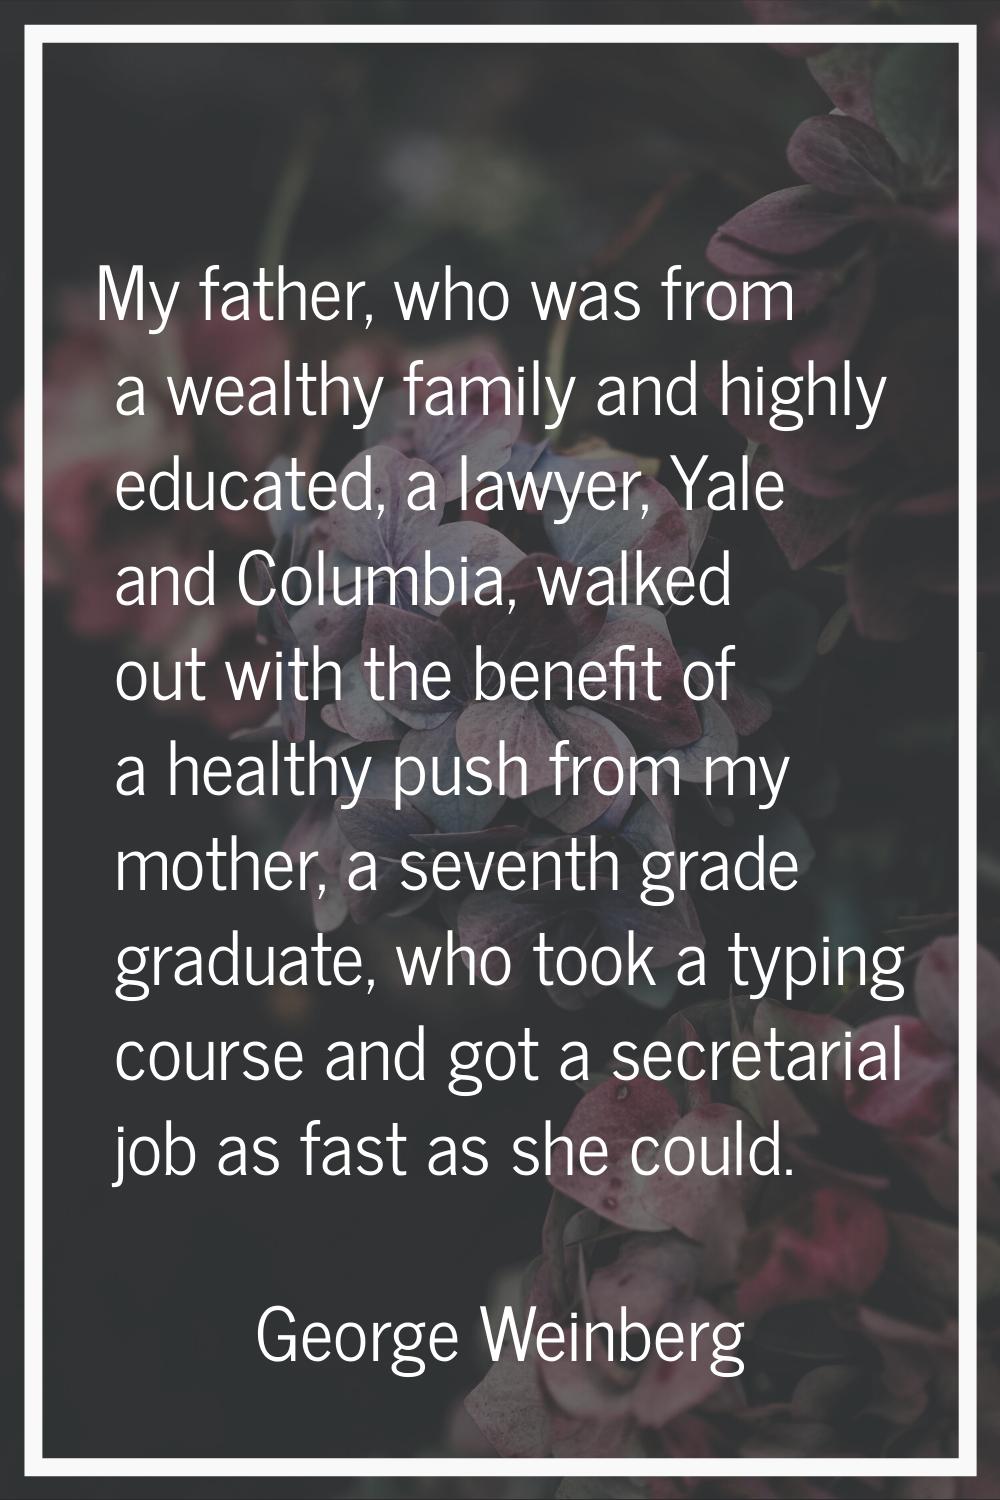 My father, who was from a wealthy family and highly educated, a lawyer, Yale and Columbia, walked o